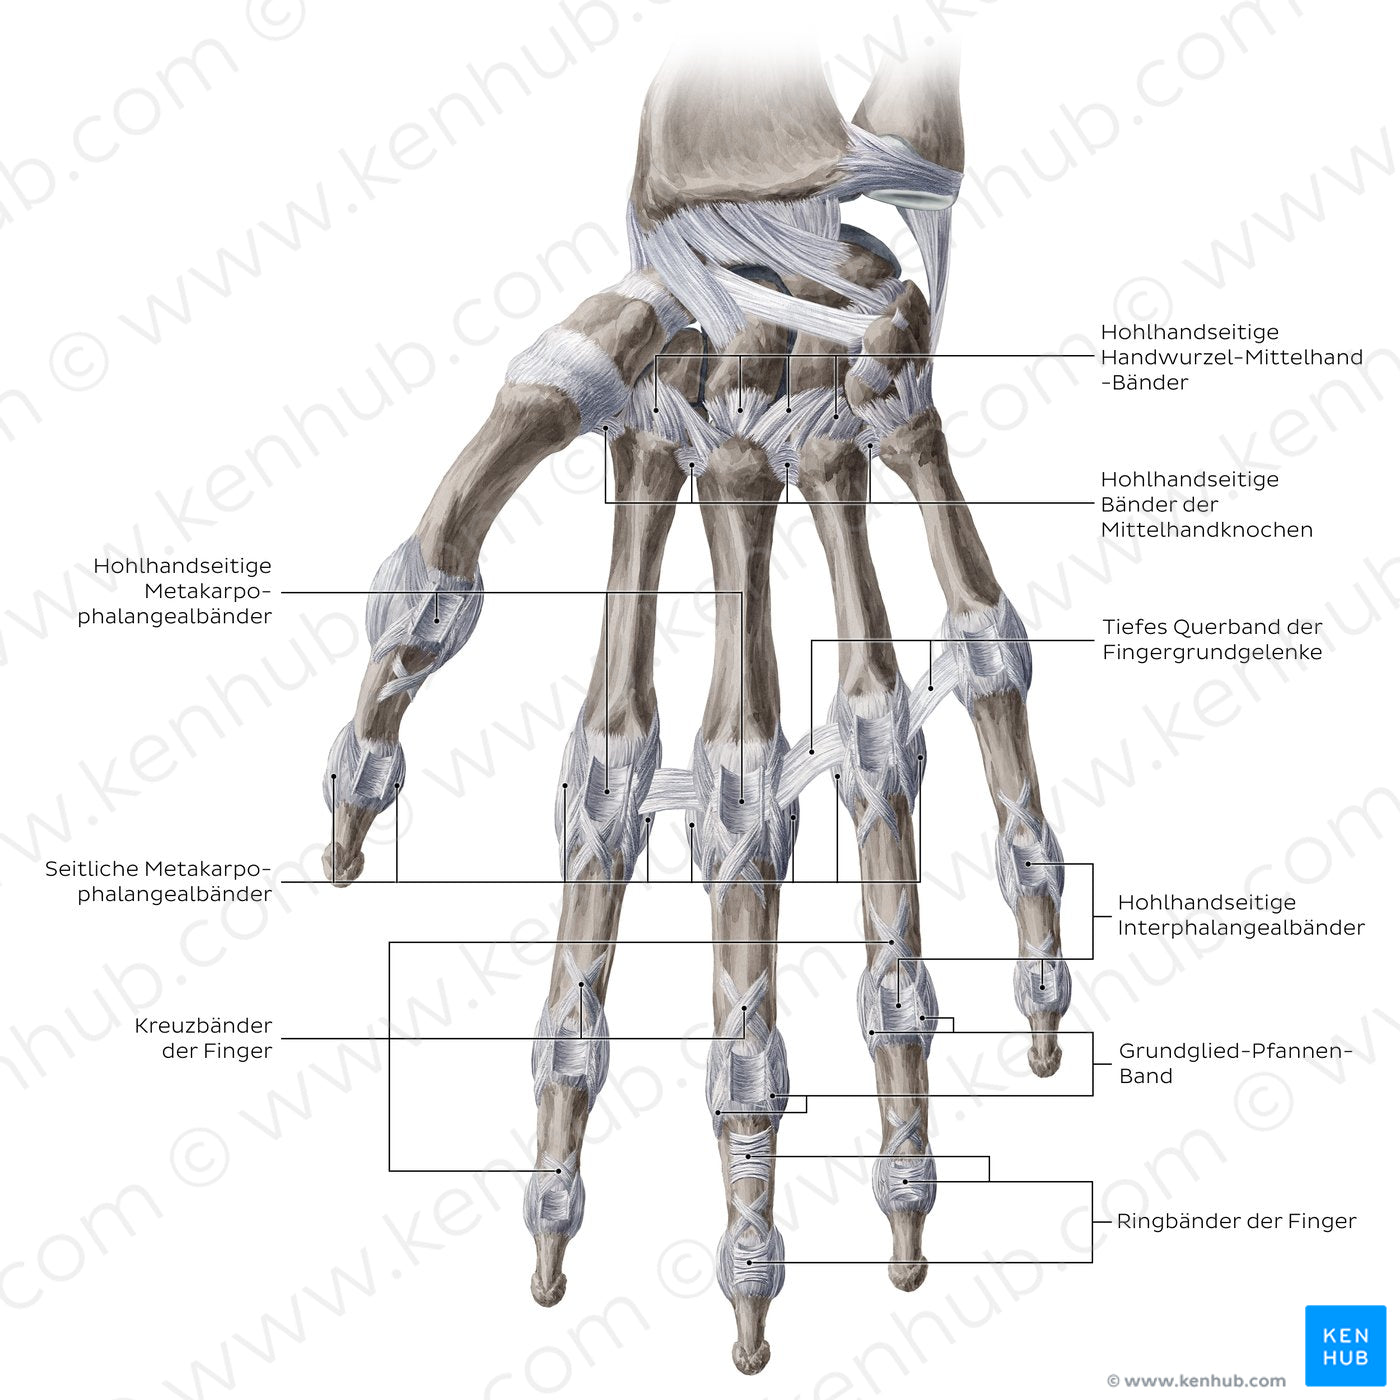 Ligaments of the metacarpals and phalanges: Palmar view (German)